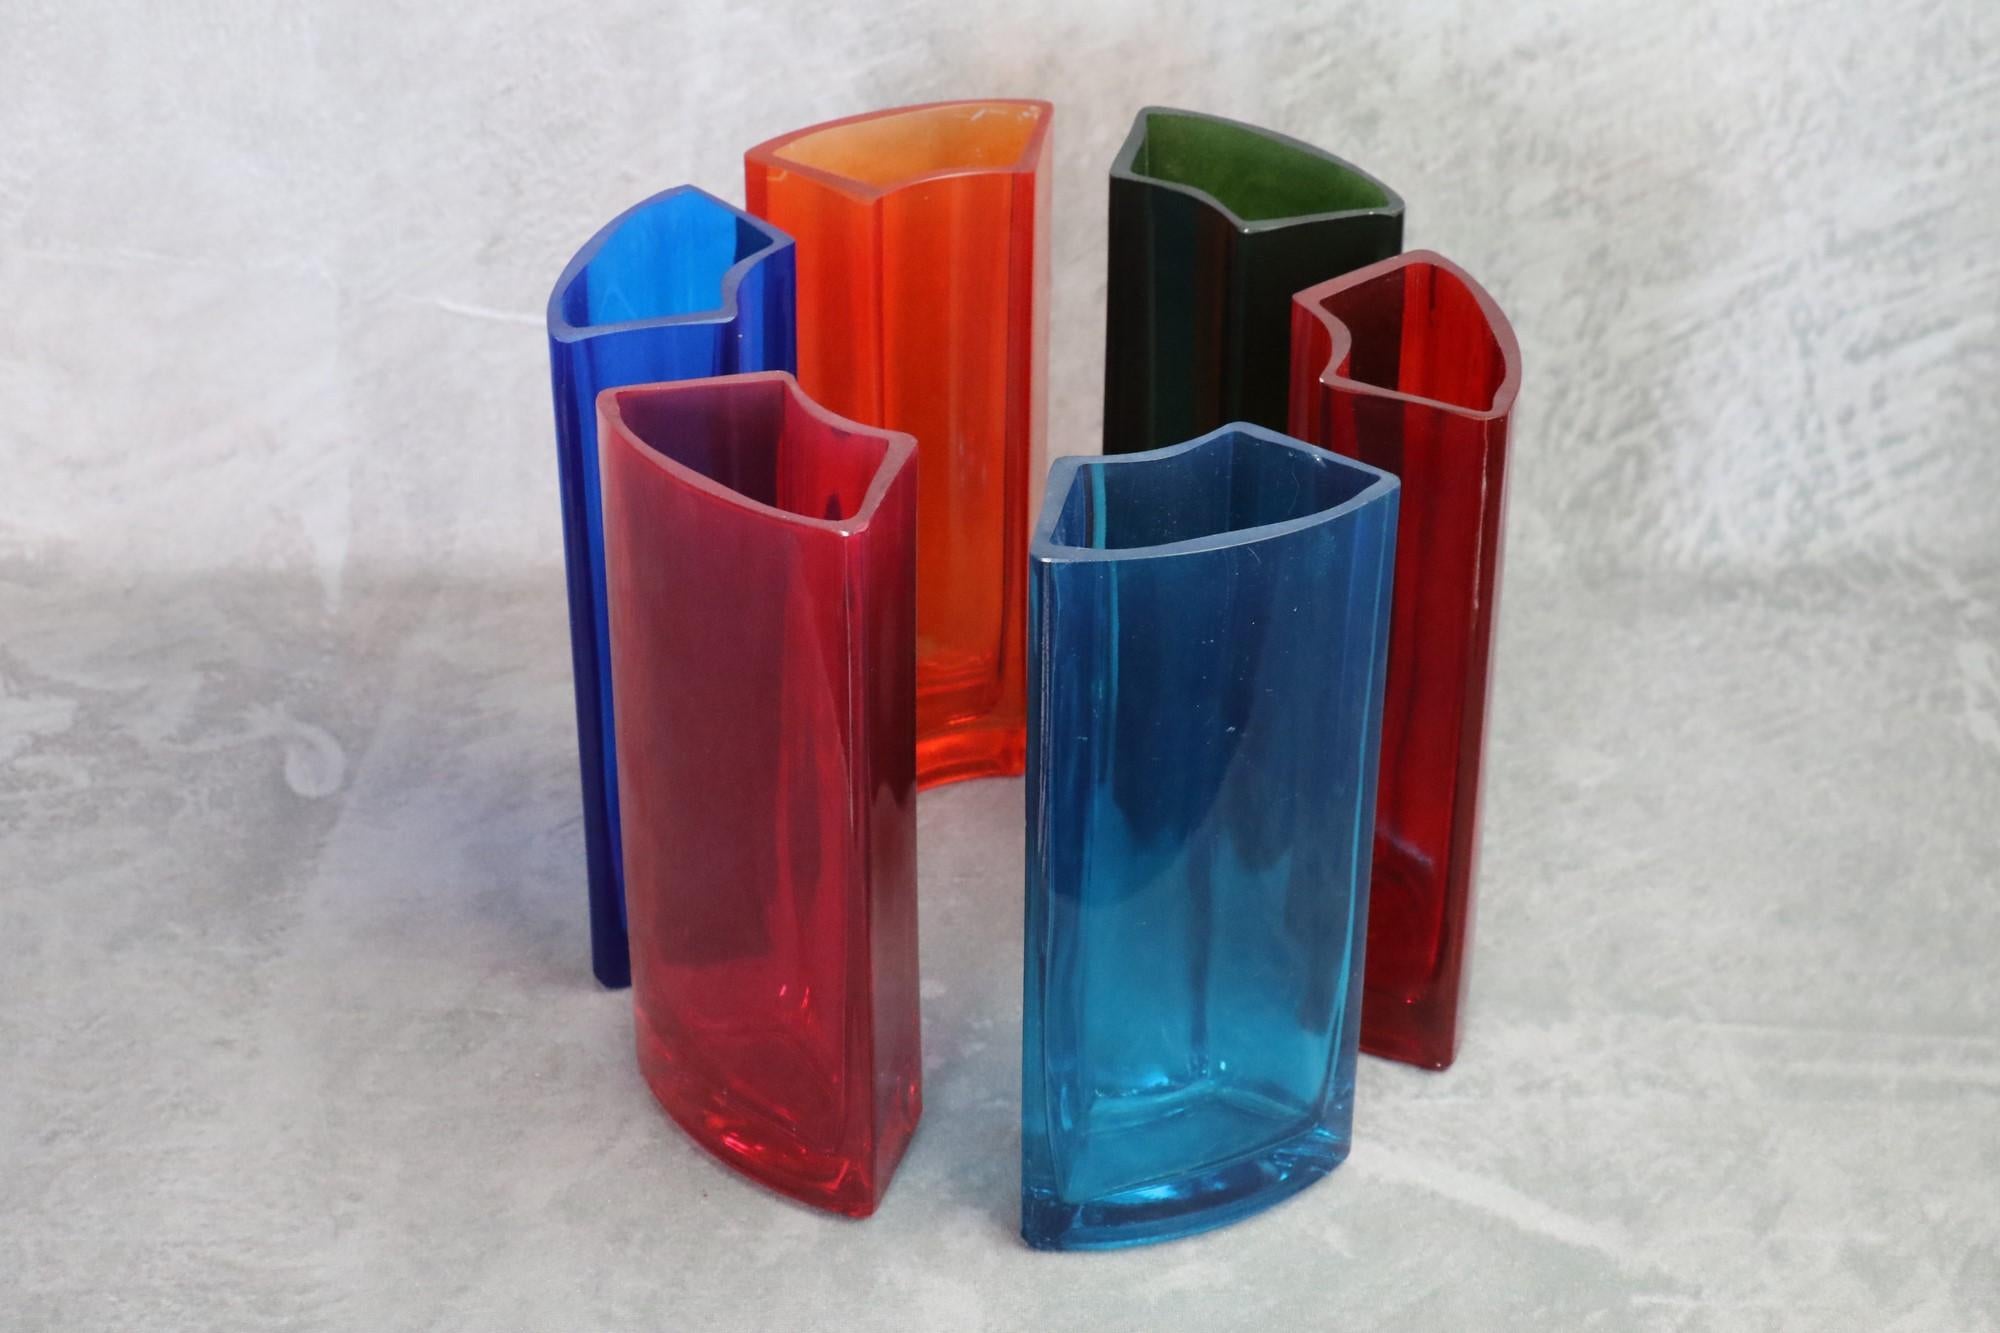 Multicoloured glass design vase by Per Ivar Ledang for Ikea - Scandinavian Design - 1990 - Era Gio Ponti Fulvio Bianconi Alvar Aalto

Sectional, multicoloured, with thick glass, it is very original and elegant. It is iconic of the design of the